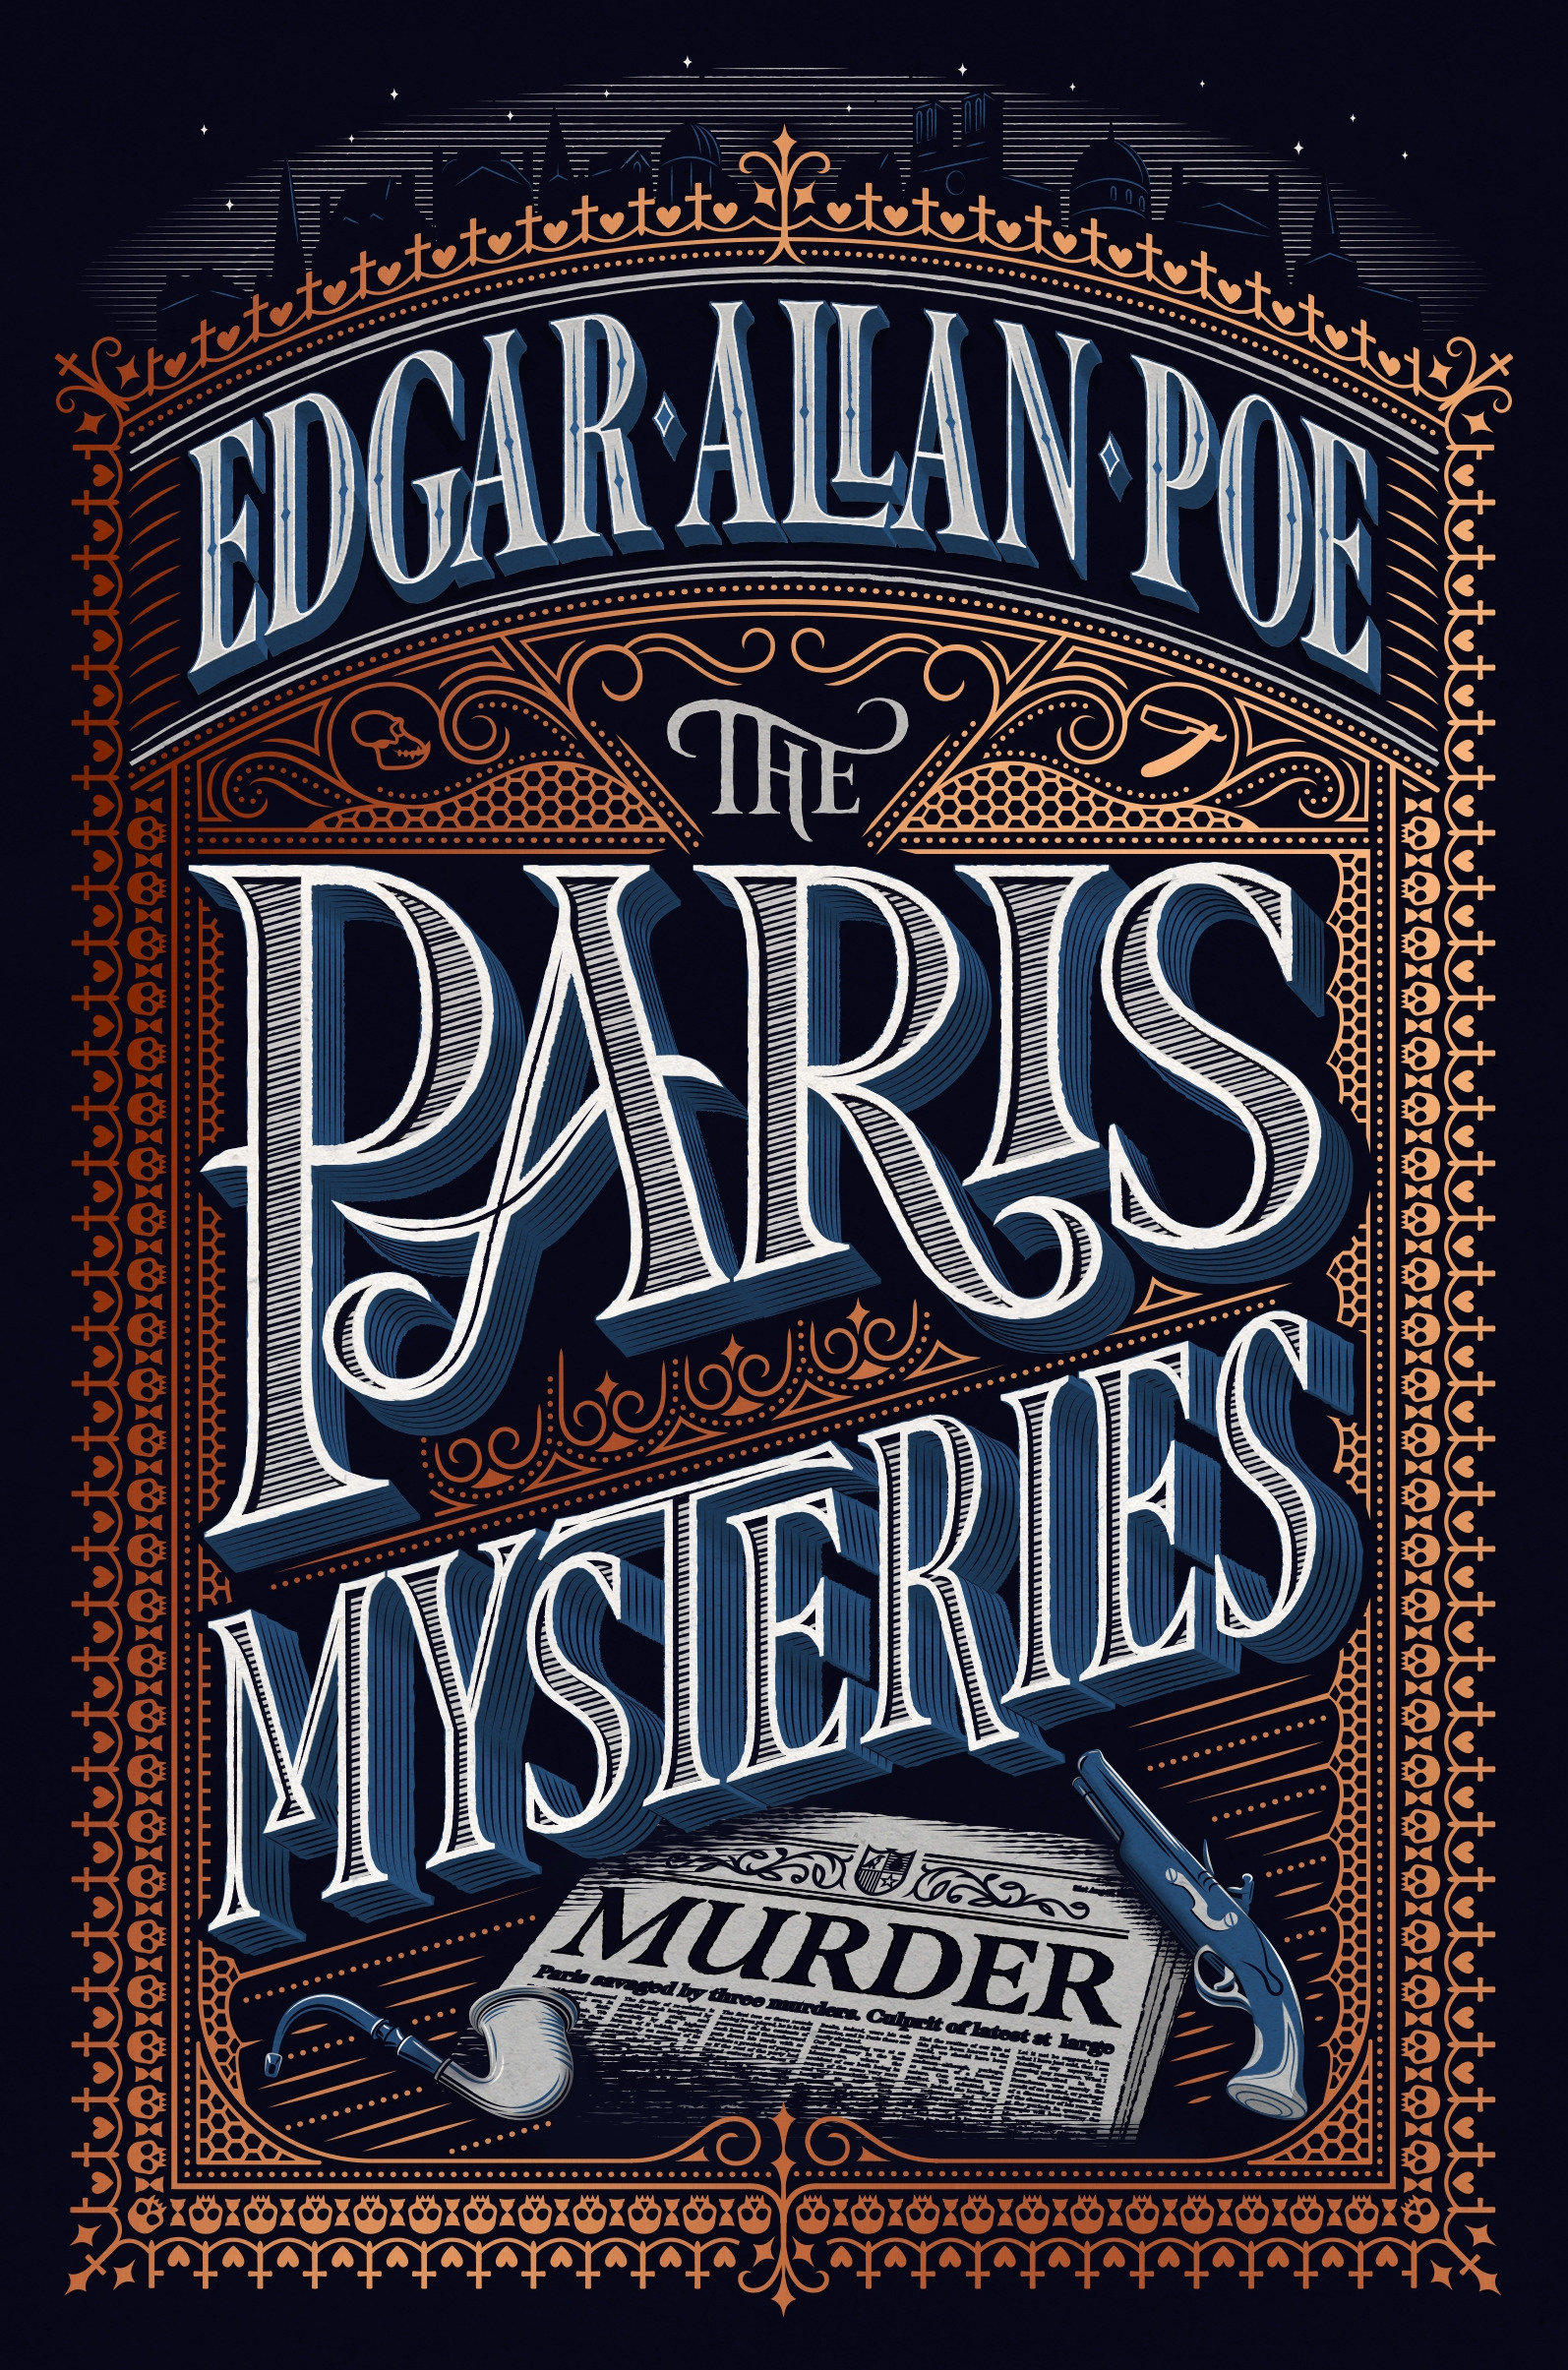 The Paris Mysteries, Deluxe Edition (Hardcover Book)